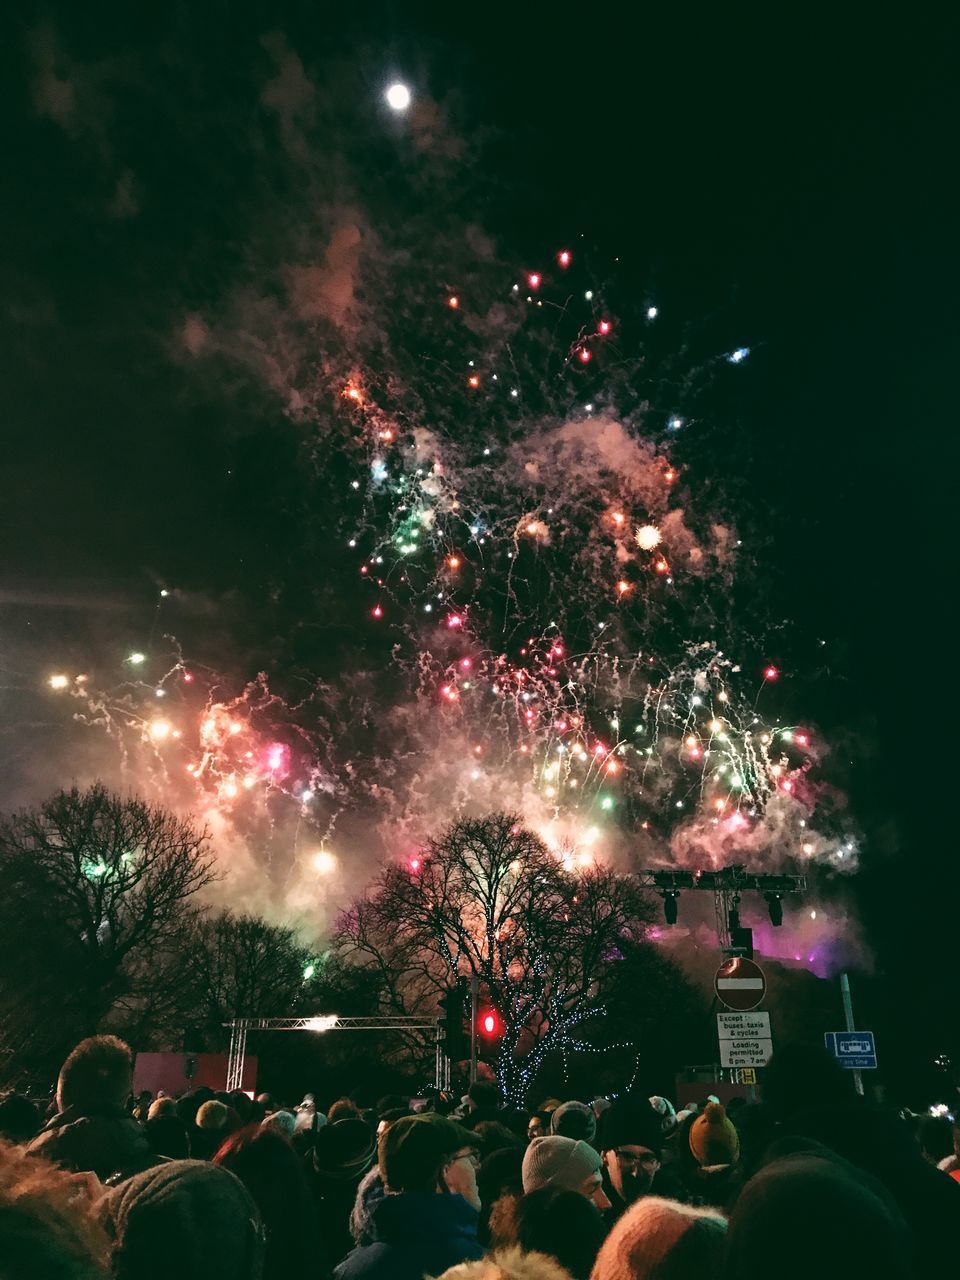 FIREWORK DISPLAY AT NIGHT DURING FESTIVAL